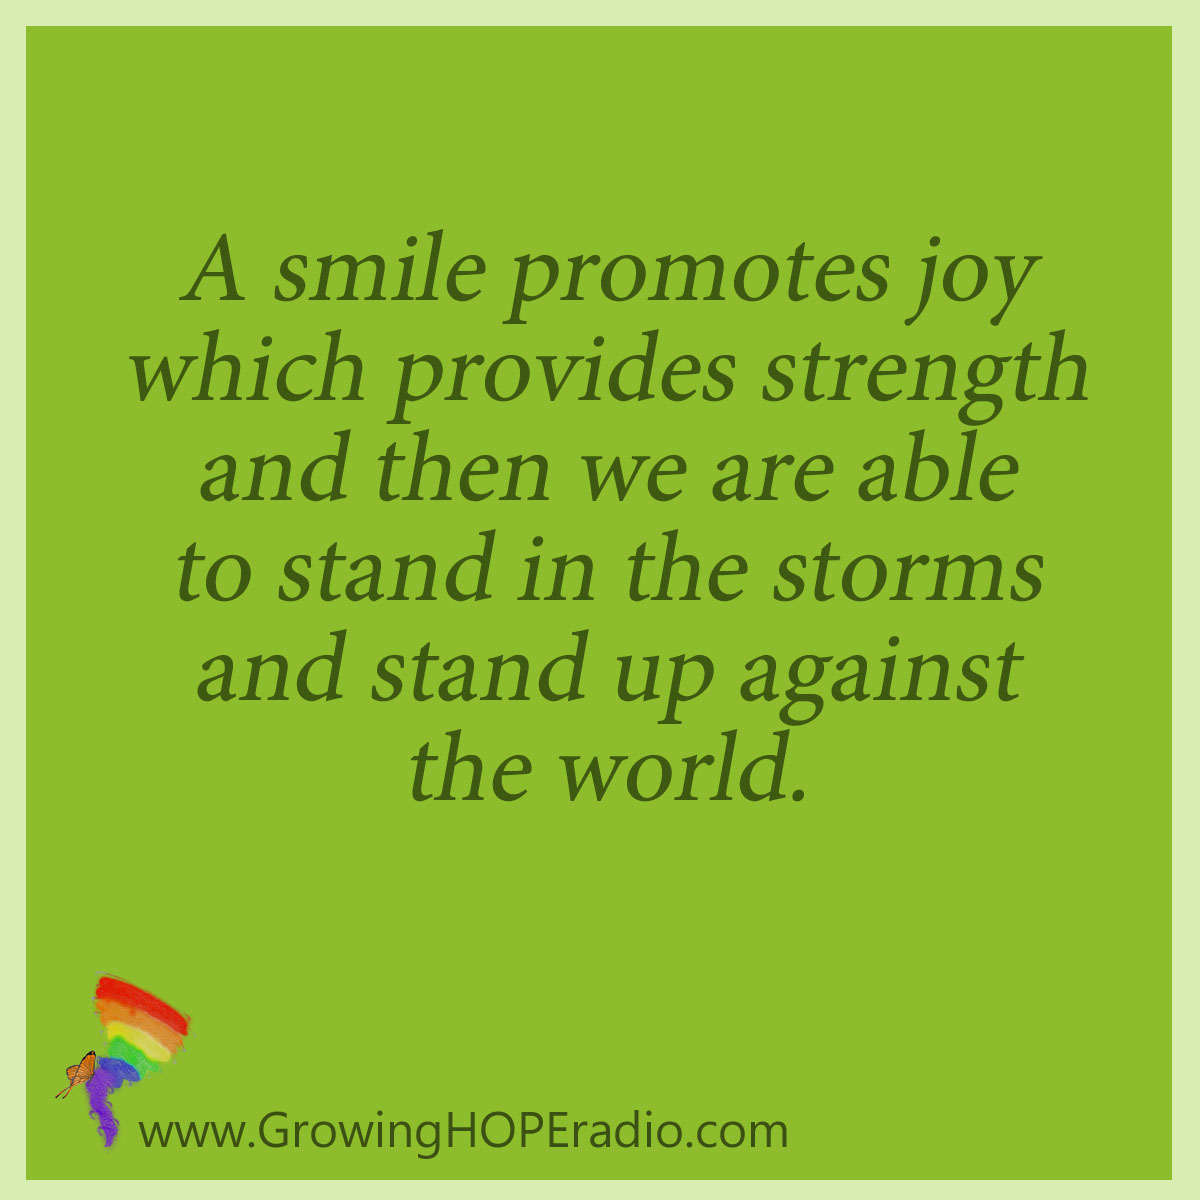 Growing HOPE - quote smiles promote